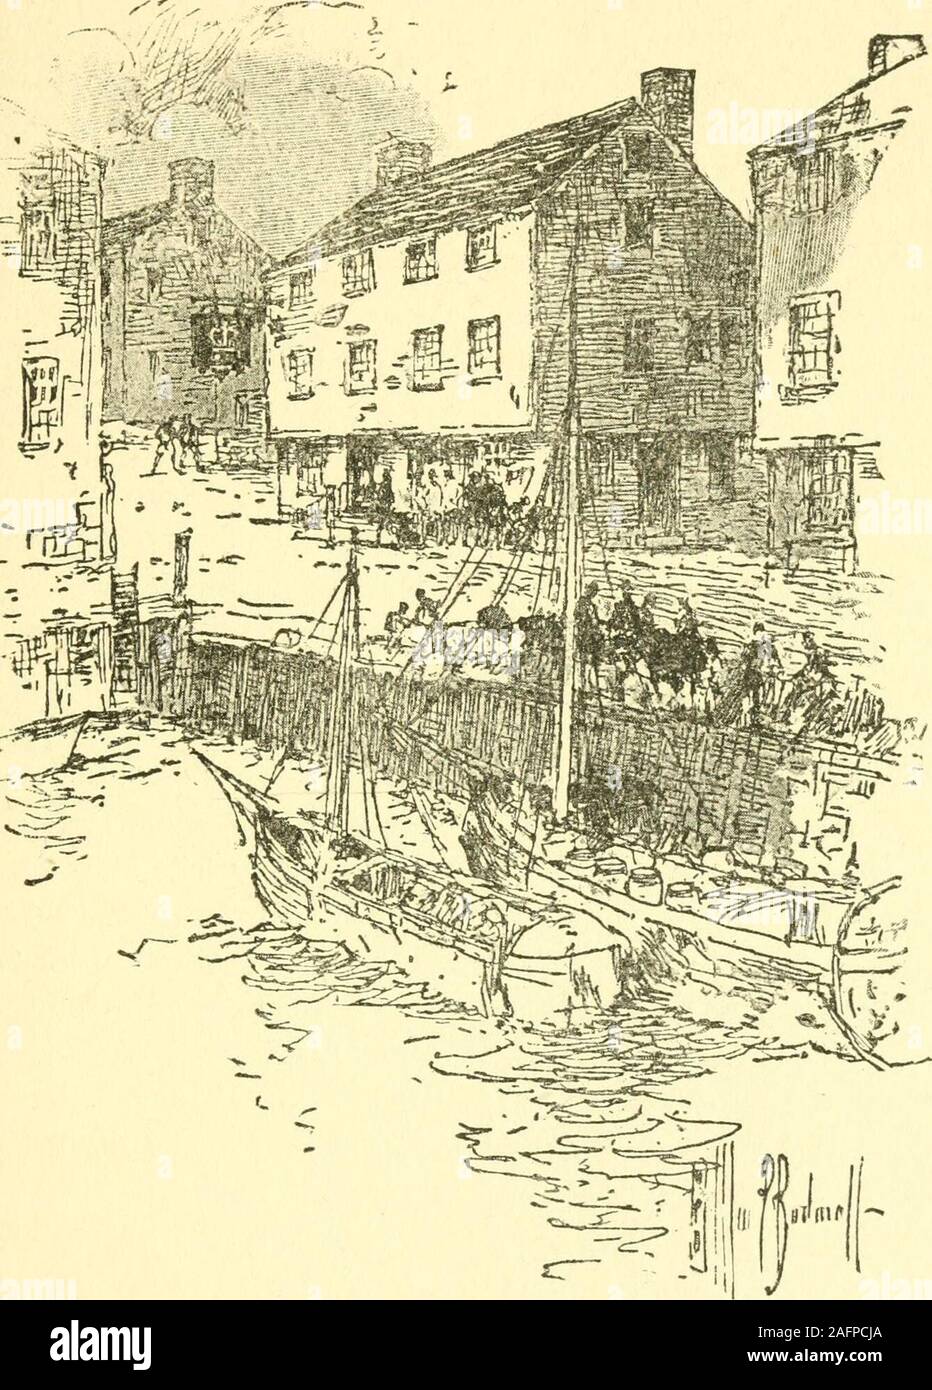 . Old Boston taverns and tavern clubs. de-scribed as being at the head of Long Wharf. Castle Tavern, afterward the George Tavern. North-east by Wings Lane (Elm Street), front or southeast byDock Square. For an account of Hudsons marital troubles,see Winthrops New England, II. 249. Another house ofthe same name is mentioned in 1675 and 1693. A stillearlier name was the Blew Bell, 1673. It was inMackerel Lane (Kilby Street), corner of Liberty Square. Coles Inn. See the referred-to deed in Proc. Am. Ant.Soc, VII. p. 51. For the episode of Lord Leigh consultOld Landmarks of Boston, p. 109. Cromwel Stock Photo